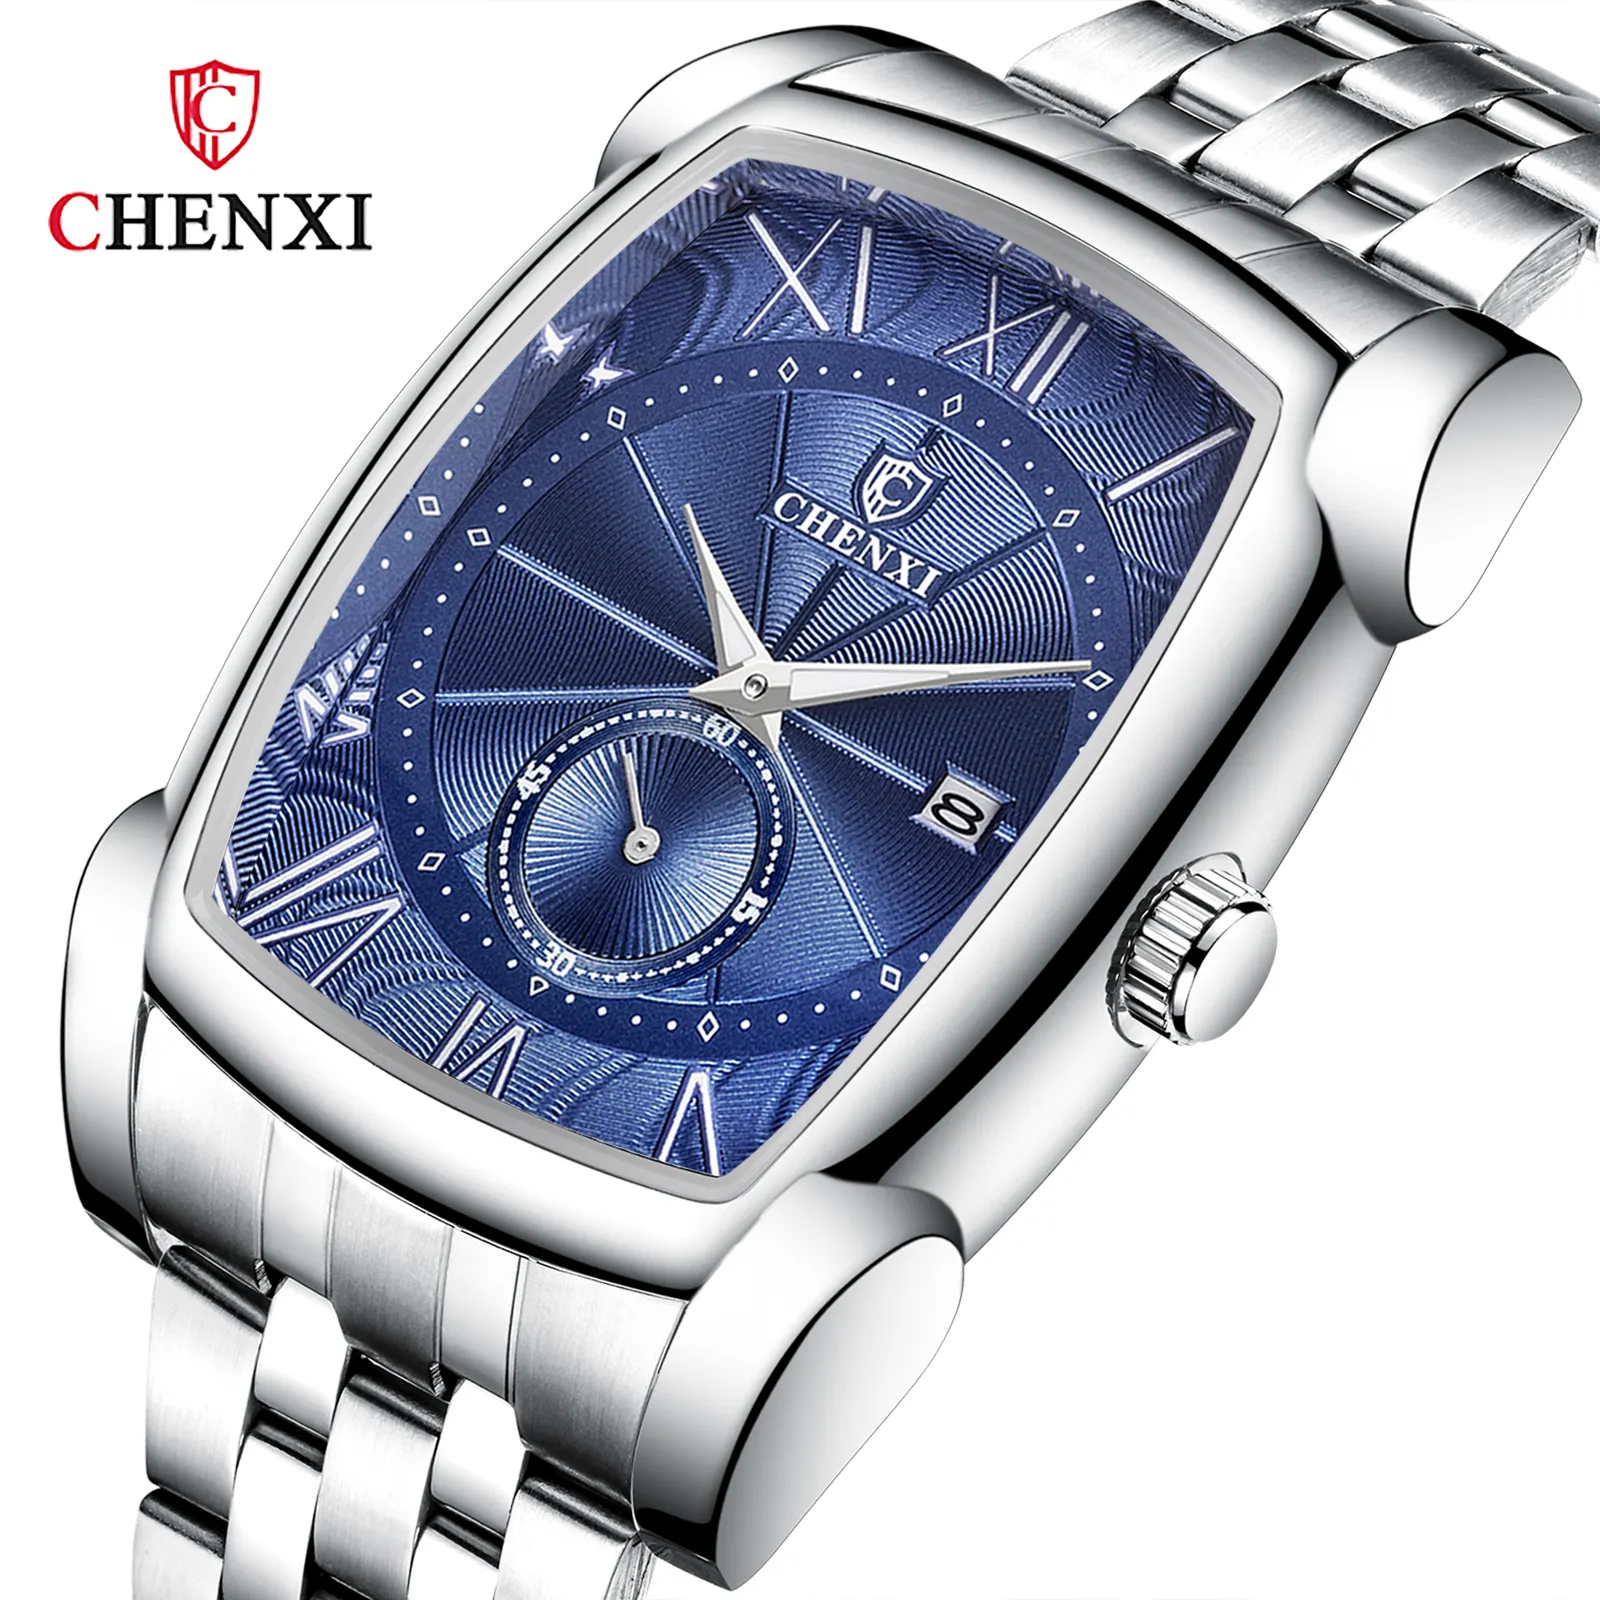 CHENXI watch cheap price top luxury quality best choice for oversea market wrist watches